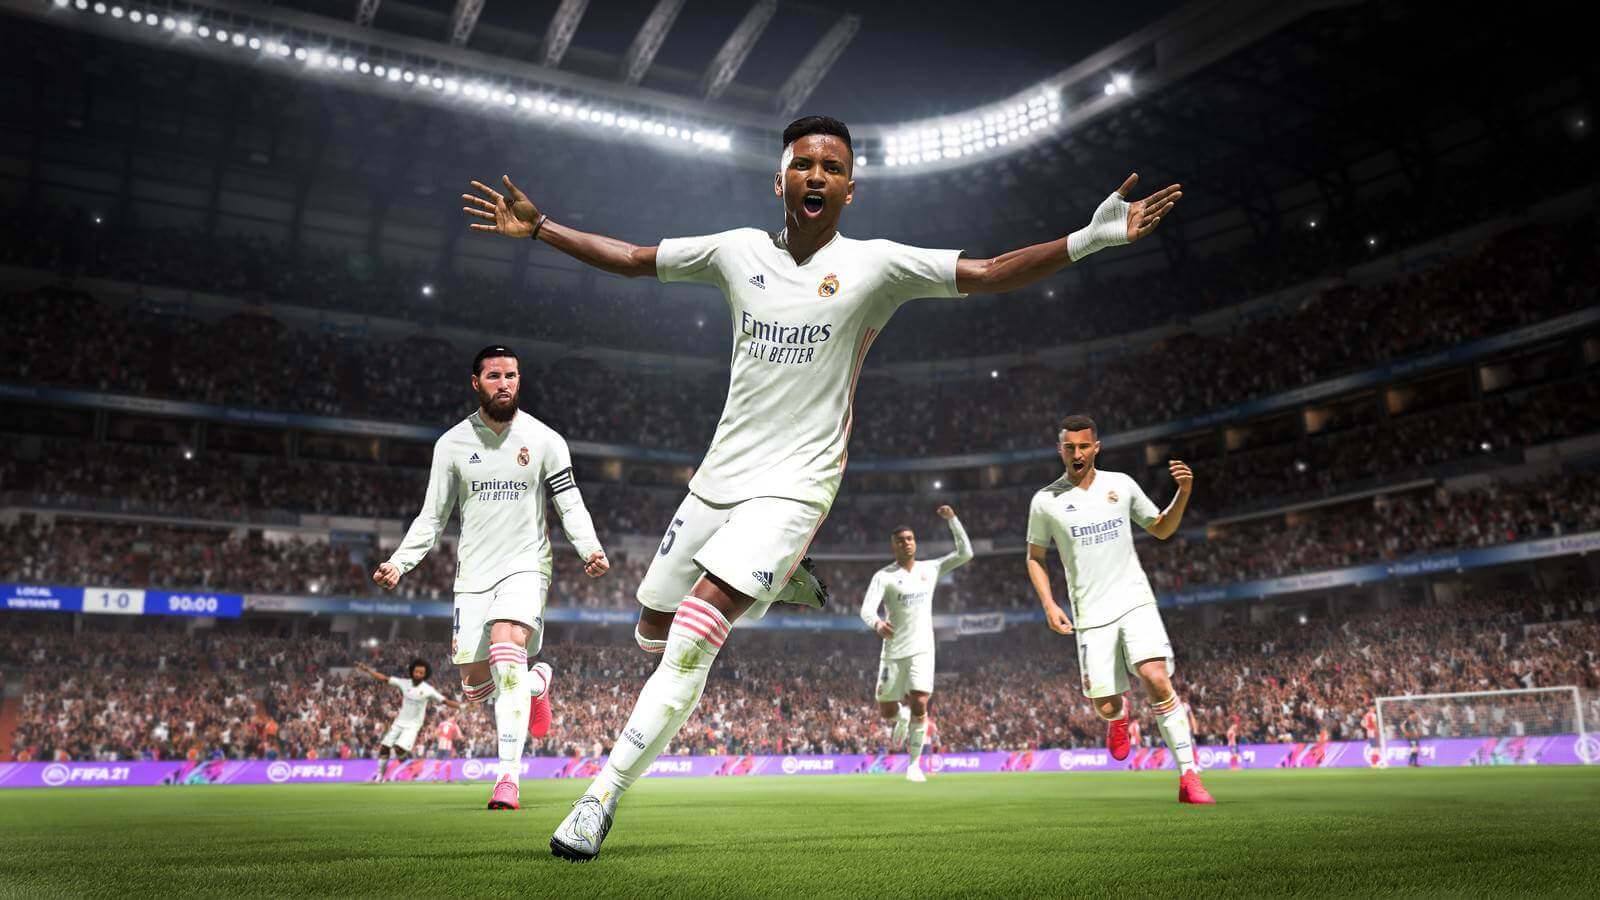 online friendly fifa 22 download free